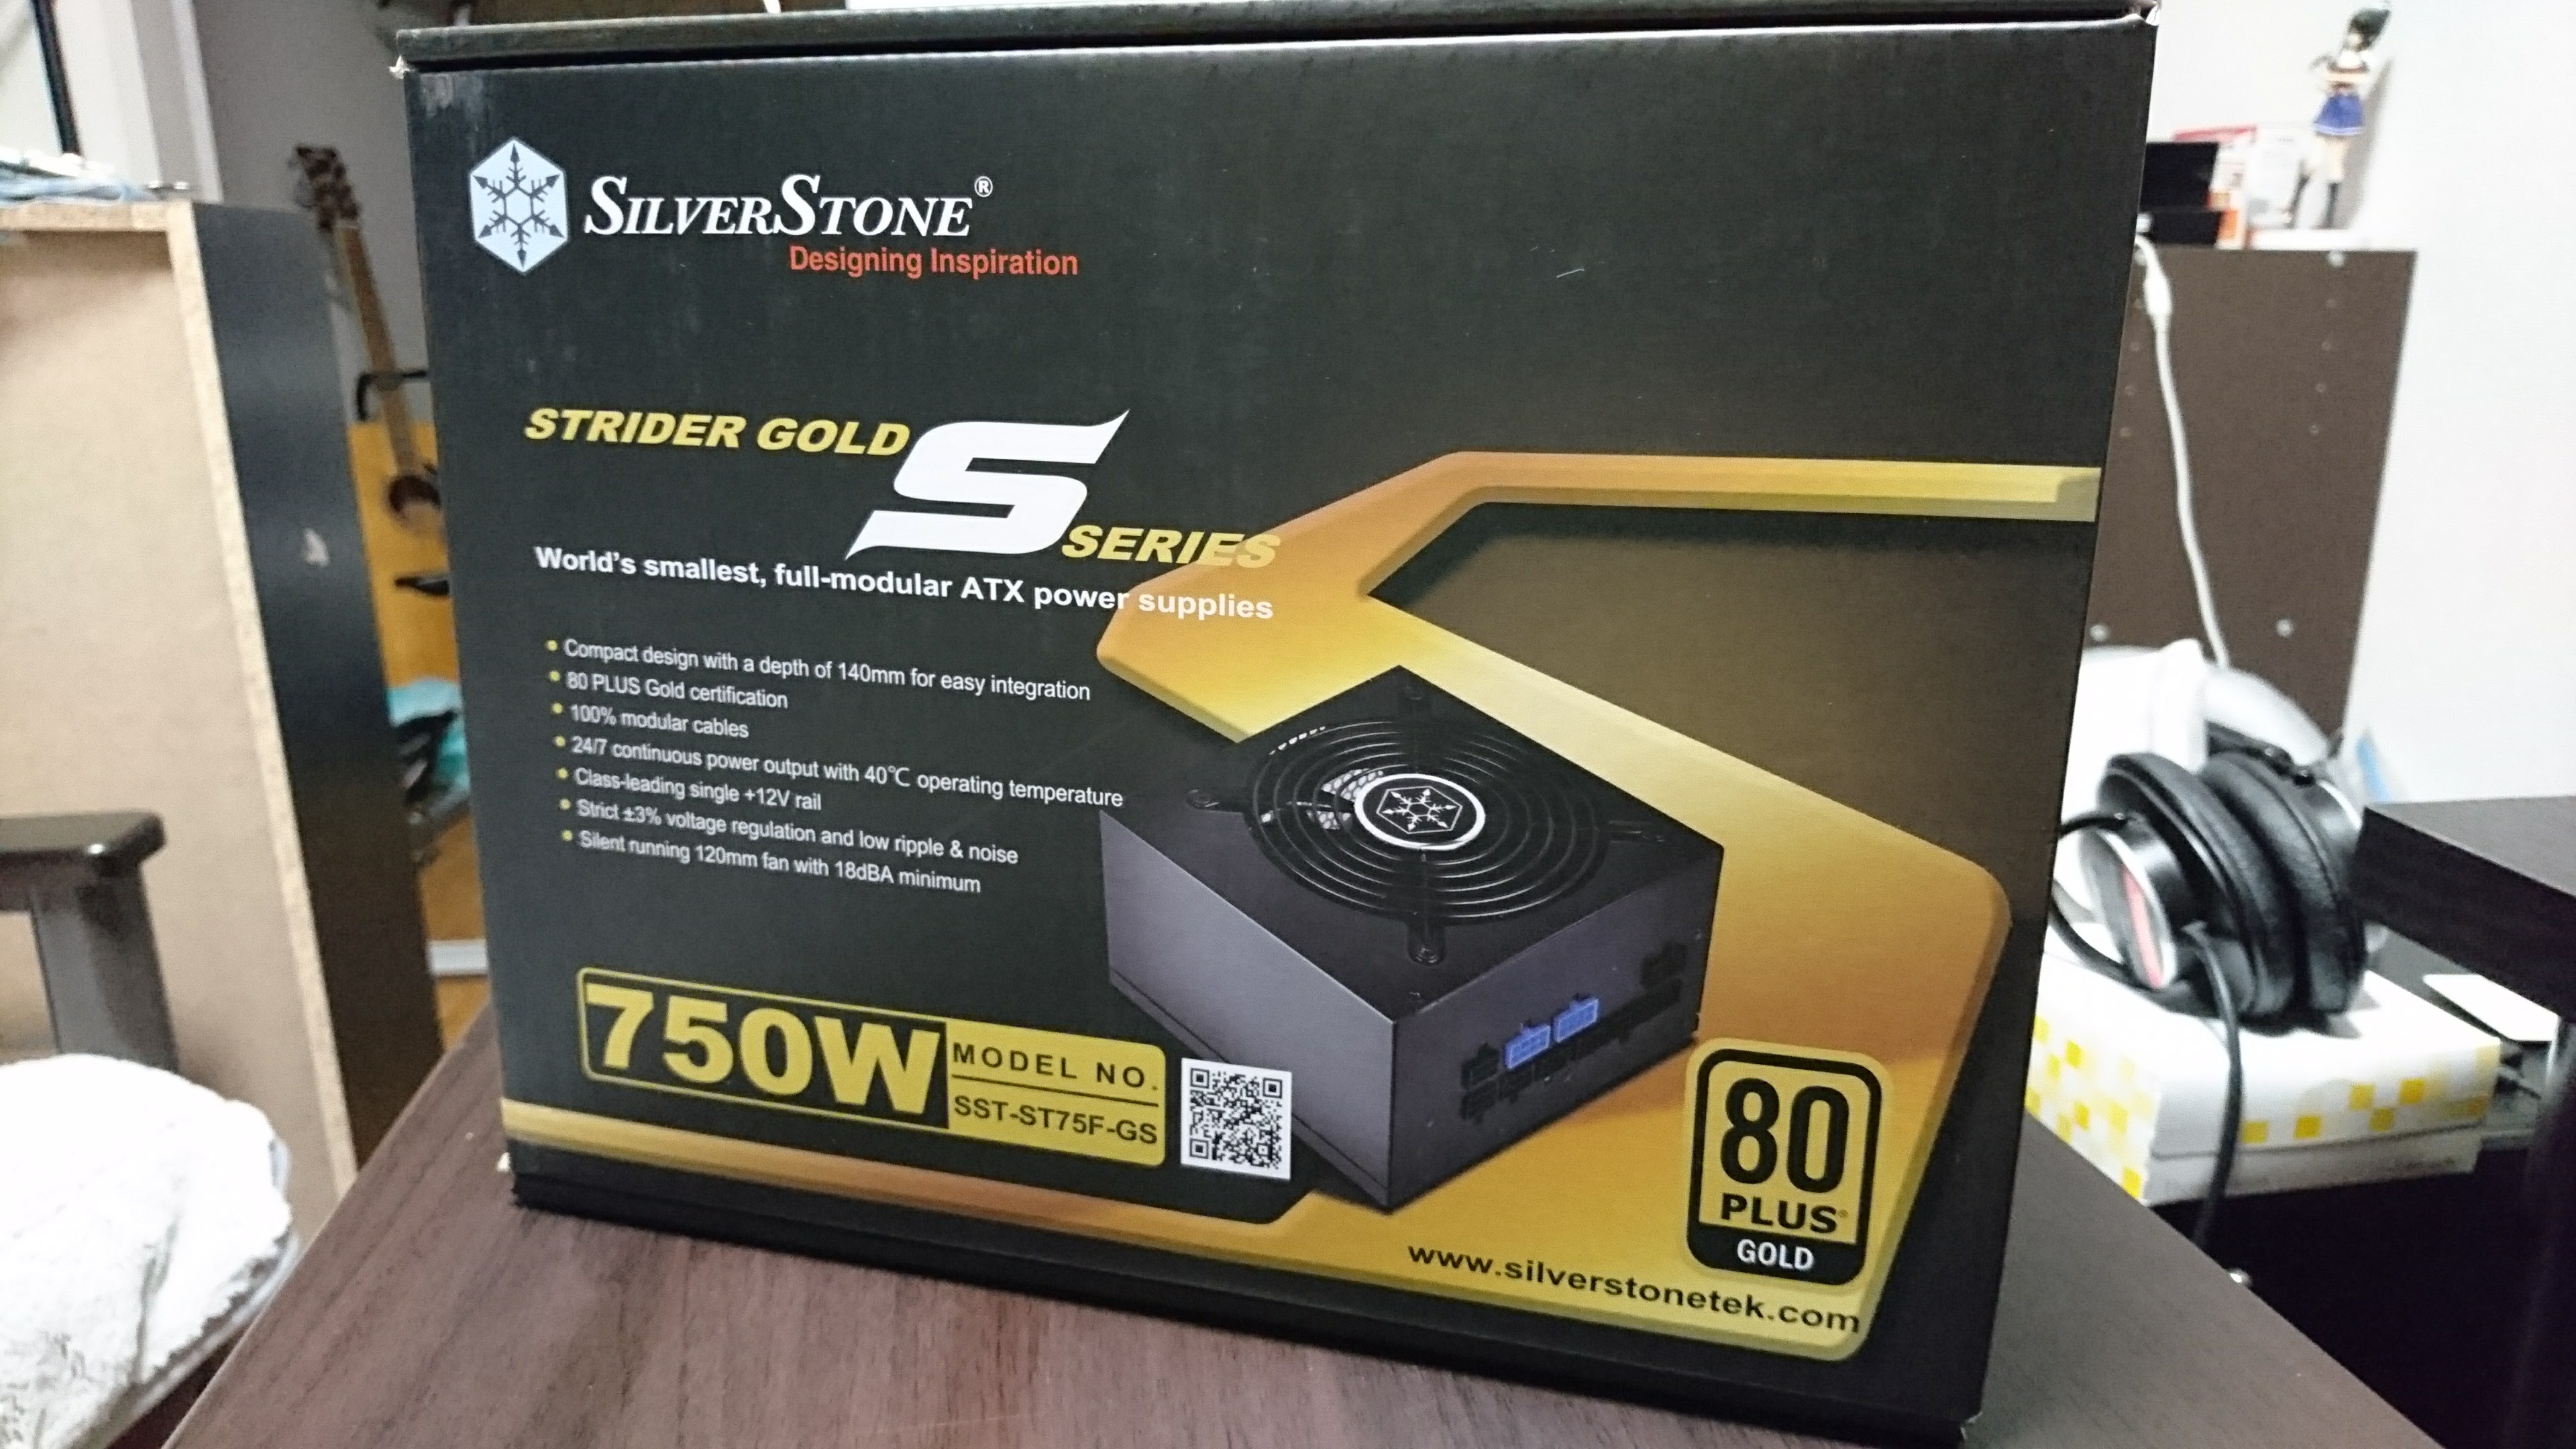 Silverstone Sst St75f Gs 80plus Gold電源 レビュー 雑談記